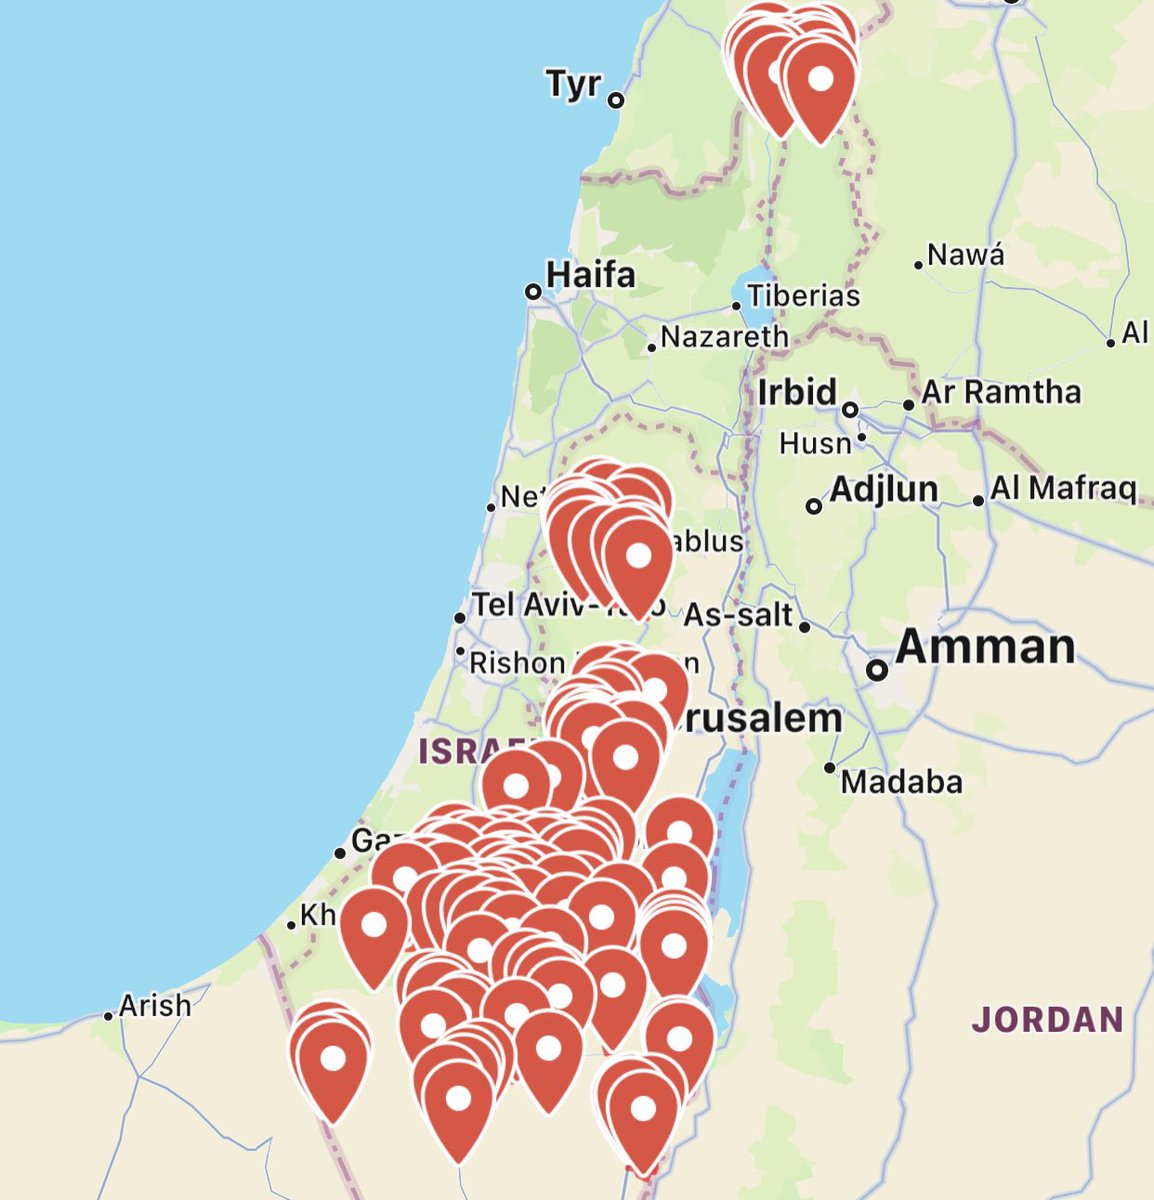 THIS IS WILD 🤯!!!! Israel is fully under attack. Sirens are not stoping from the north to the south and explosions are being heard all over. Iran has every right to defend itself. Maybe next time Israel shouldn’t bomb an embassy.